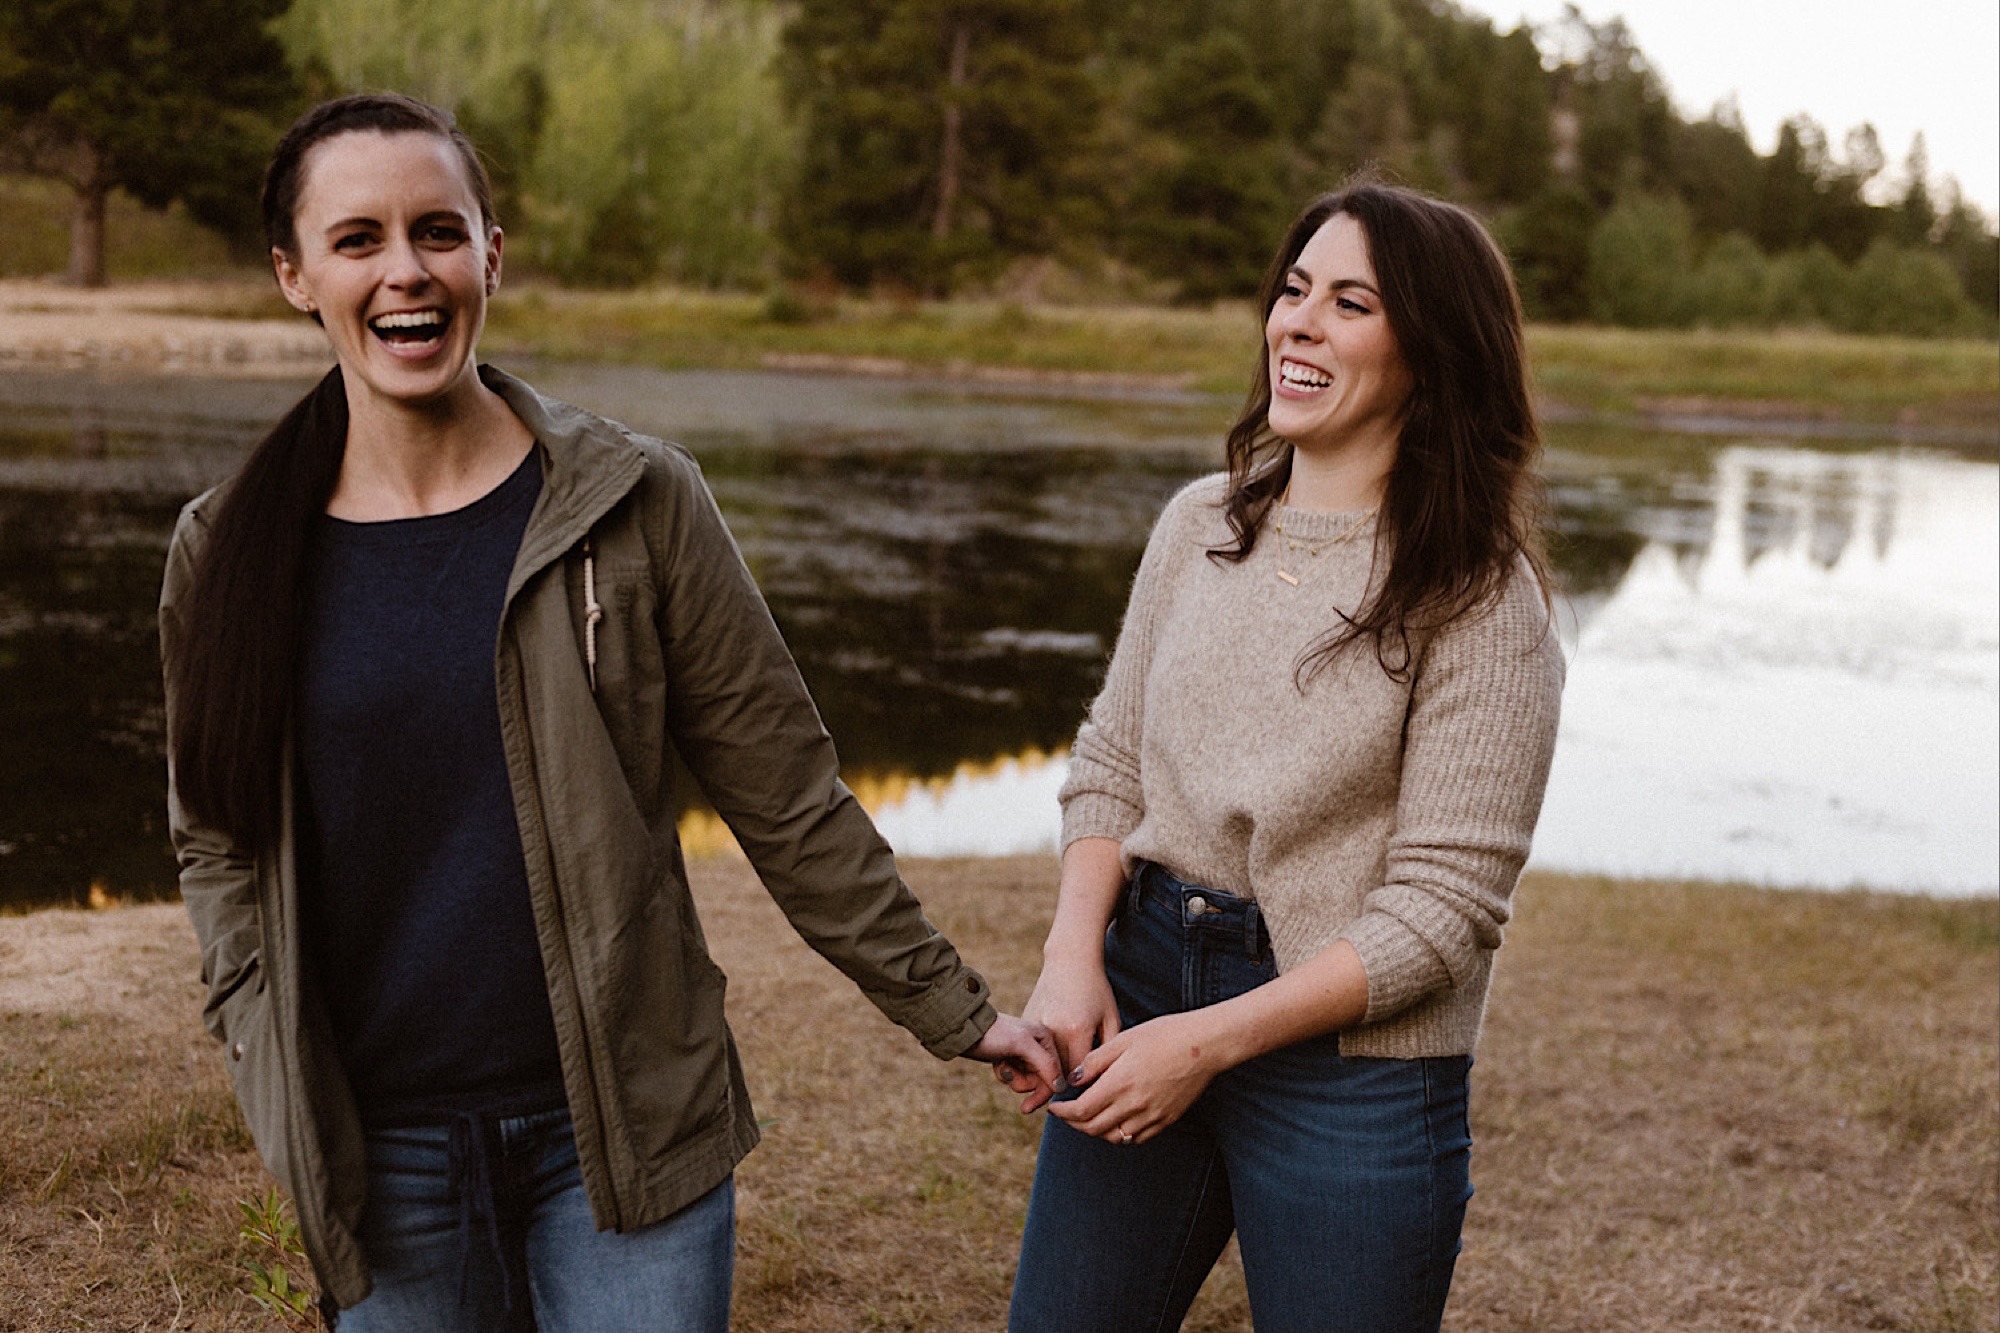 A lesbian engagement couple cuddles together at Golden Gate Canyon State Park for their Colorado engagement photos. Lesbian engagement photos | LGBTQ engagement photos in Denver | Denver engagement photos | Boulder engagement photos | Colorado engagement photos | LGBTQ Colorado engagement | Photo by Colorado elopement photographer, Denver elopement photographer, Ashley Joyce Photography.